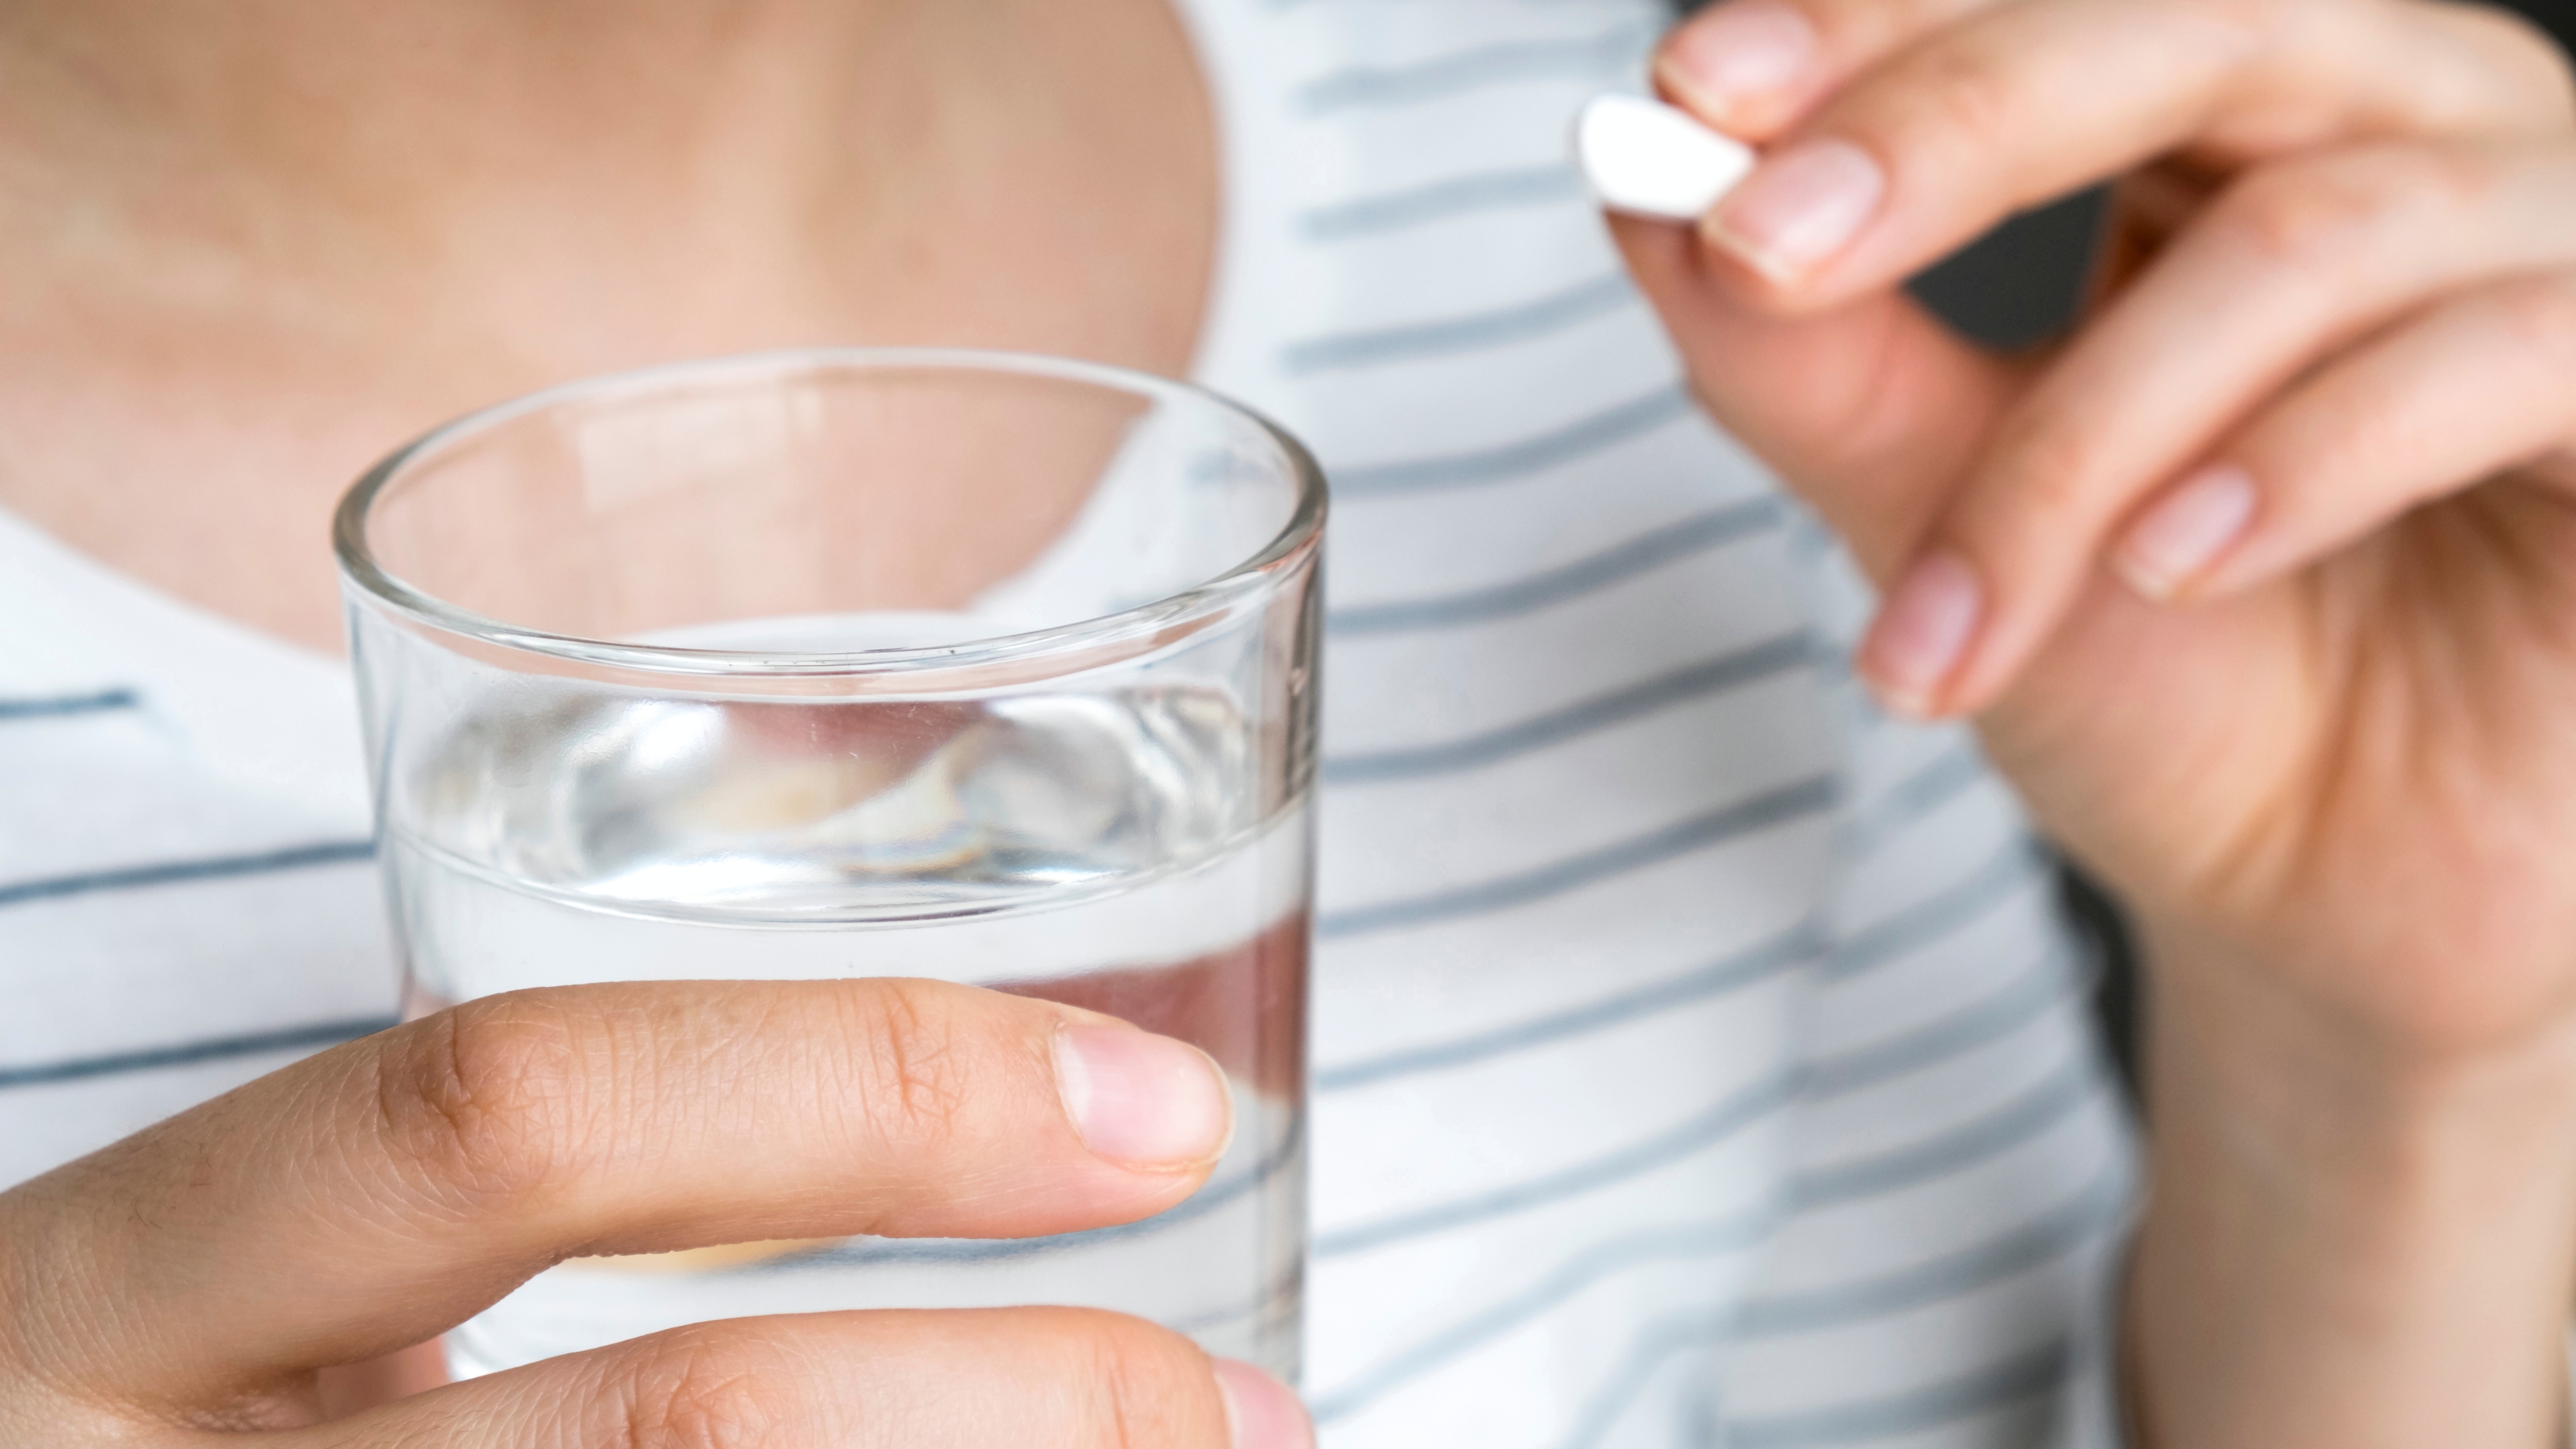 a woman holding a glass of water in one hand an a pill, perhaps prescription medicine, ready to swallow it